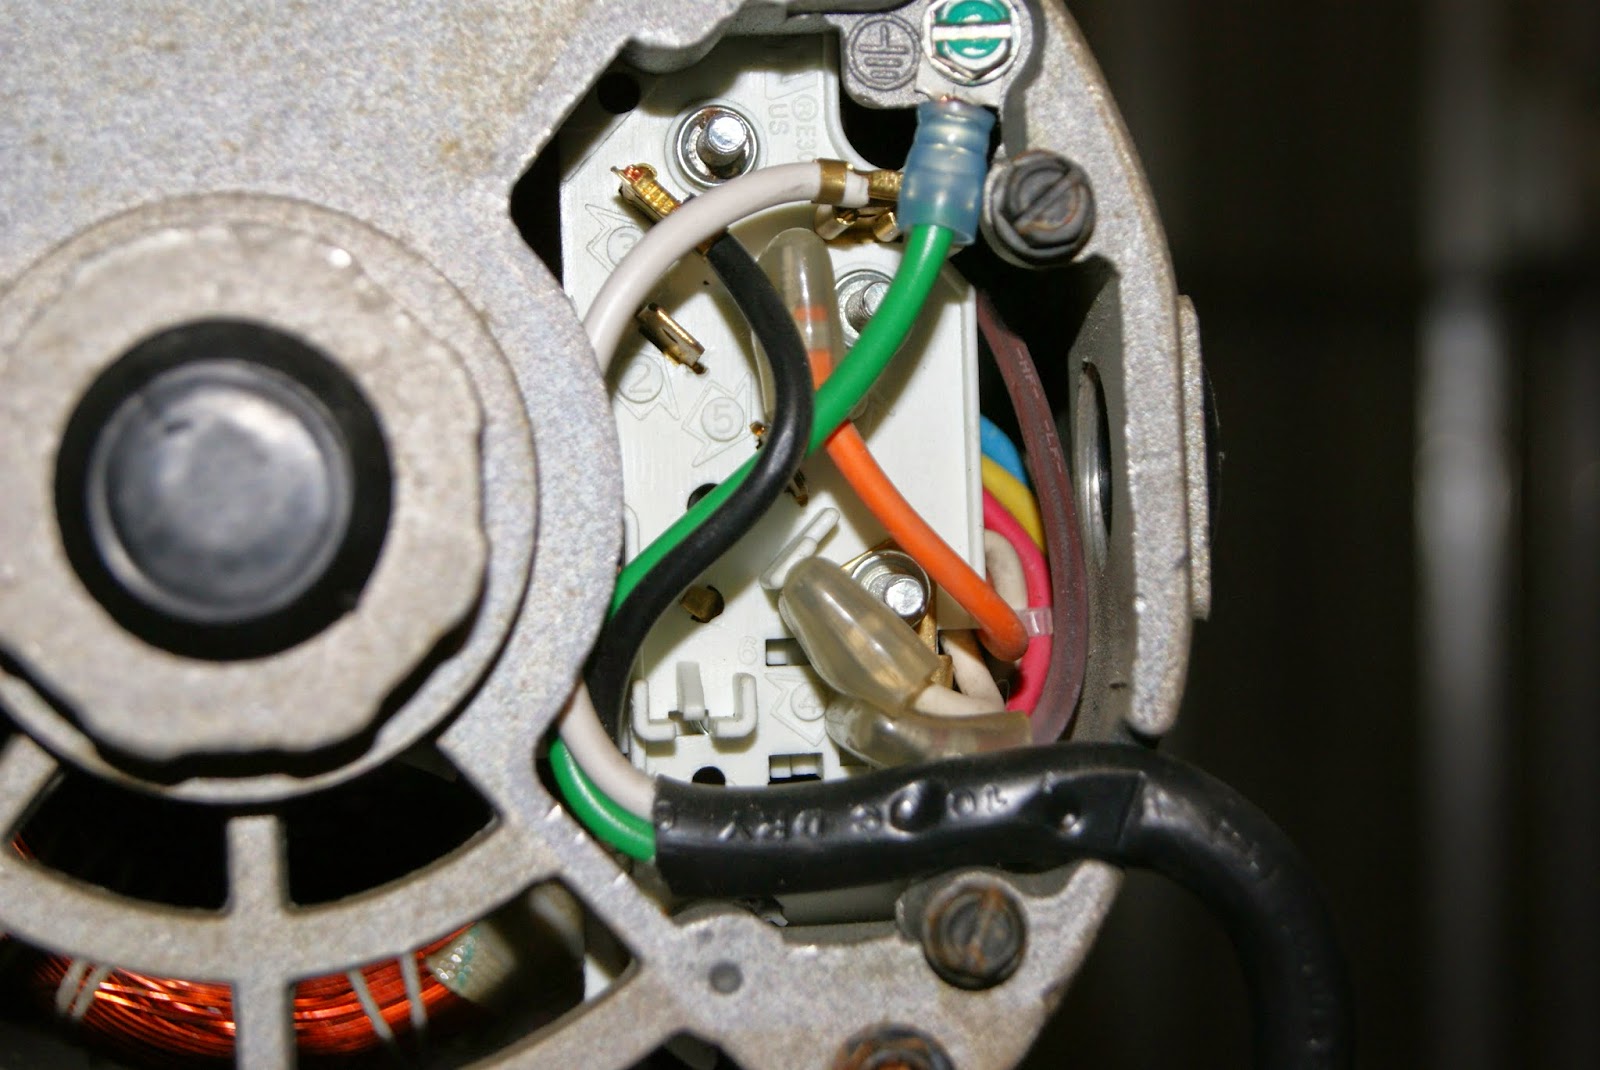 DOG Aviation John's RV-12 Blog: New Power Outlet For Air ... 110v receptacle wiring diagram 